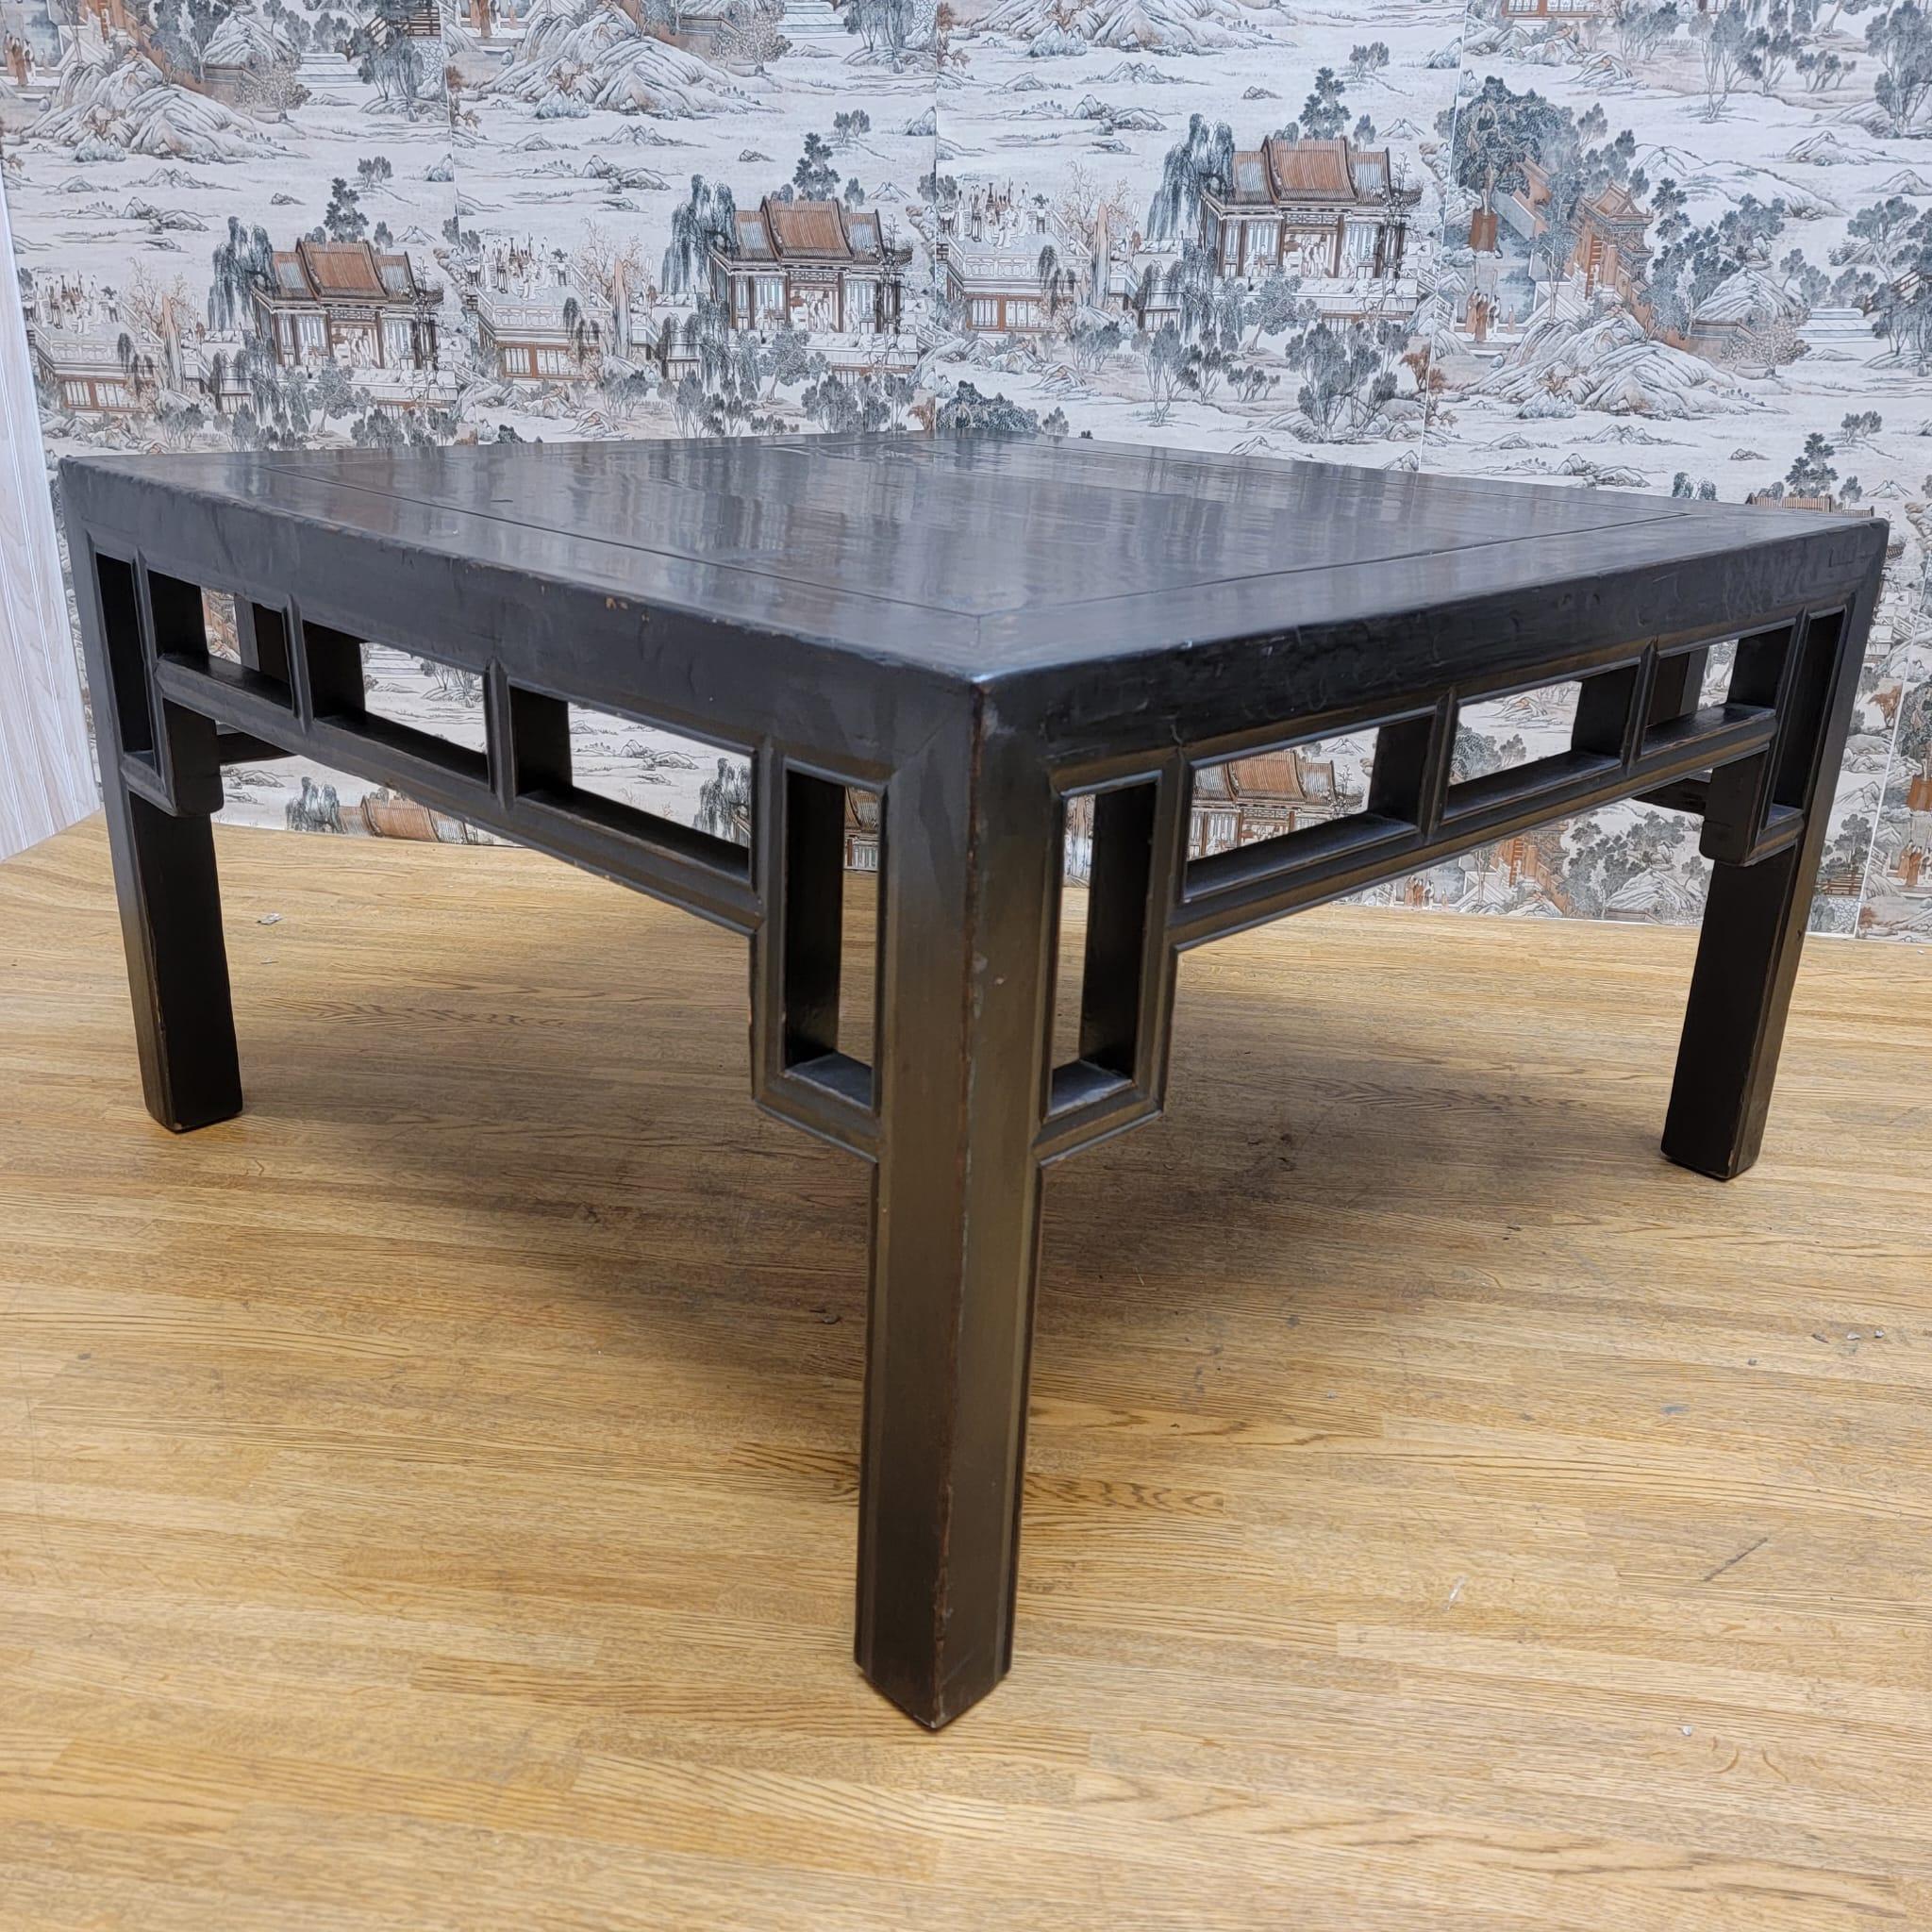 Vintage Shanxi Province Elm coffee table with Carved Apron

This Vintage elm coffee table is from the Shanxi Province of China. It has a hand carved apron and maintains its original color and patina.

Circa: 1980 

Dimensions:

W: 38